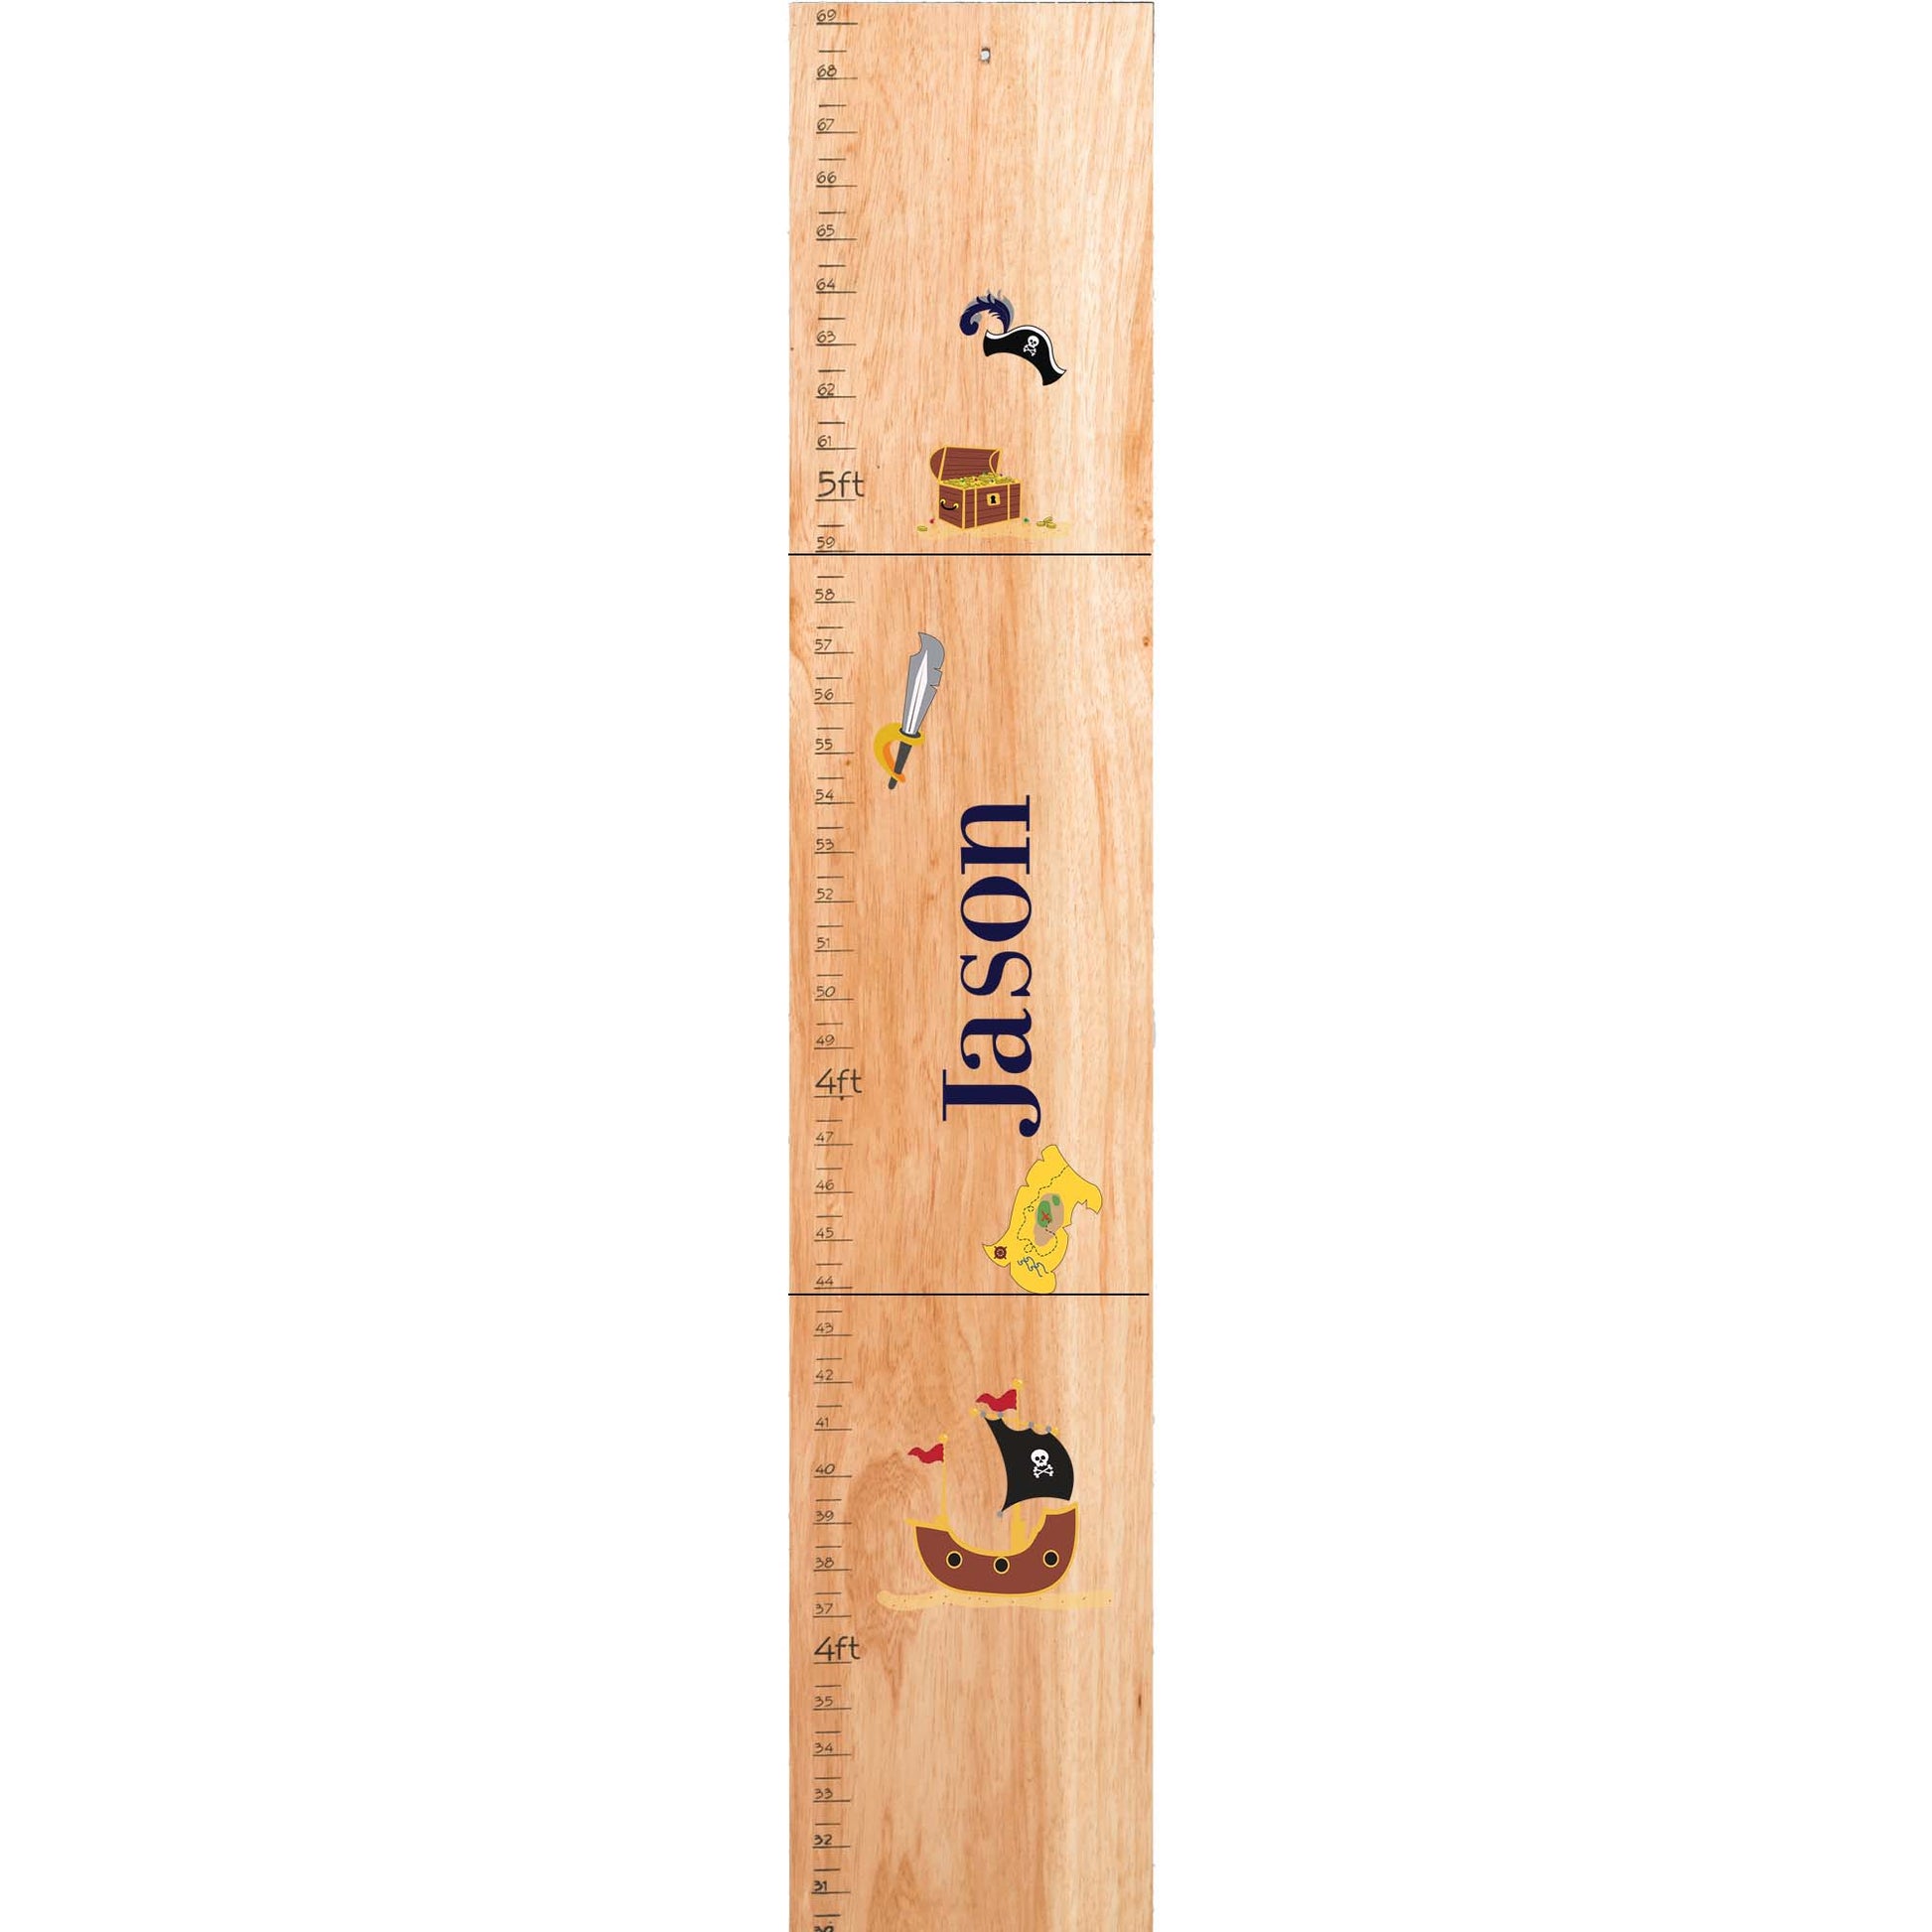 Personalized Natural Growth Chart With Robots Design